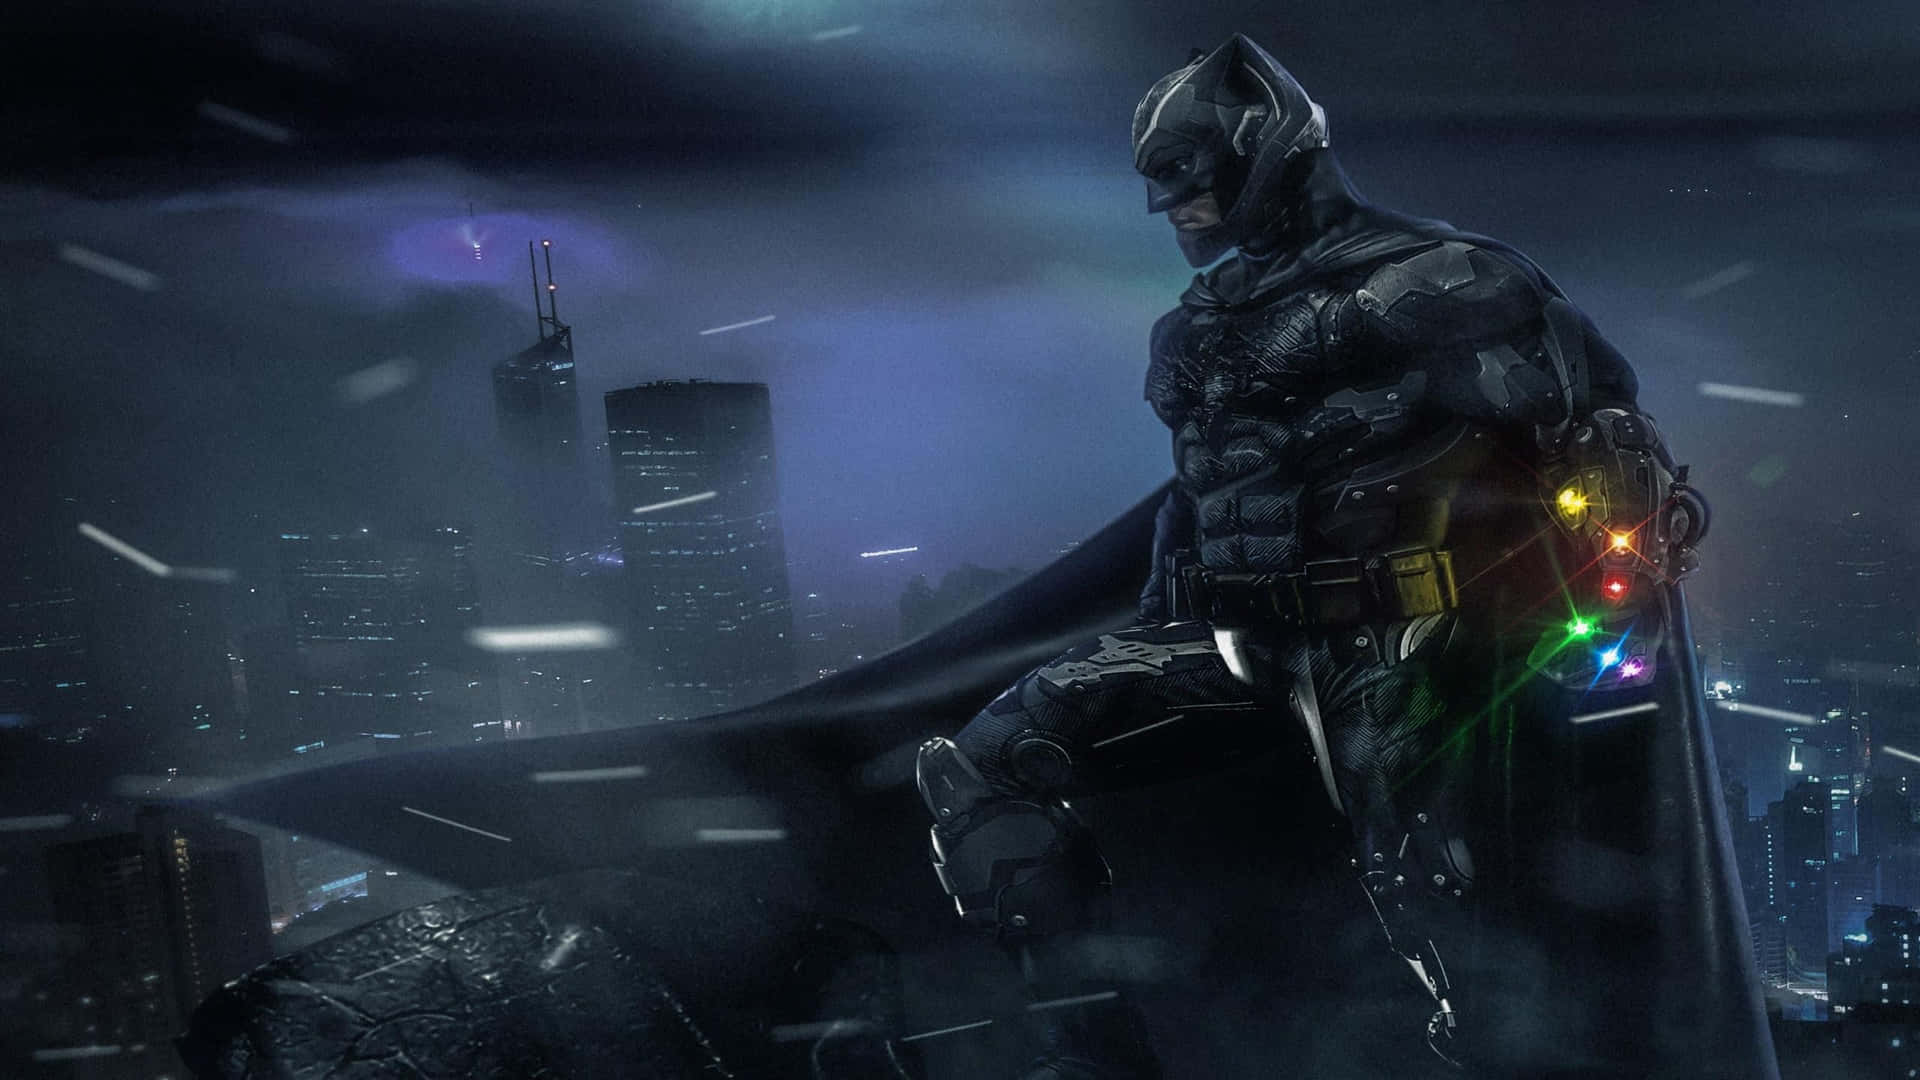 Become the Superhero You Are with this 2560 x 1440 Batman Image Wallpaper